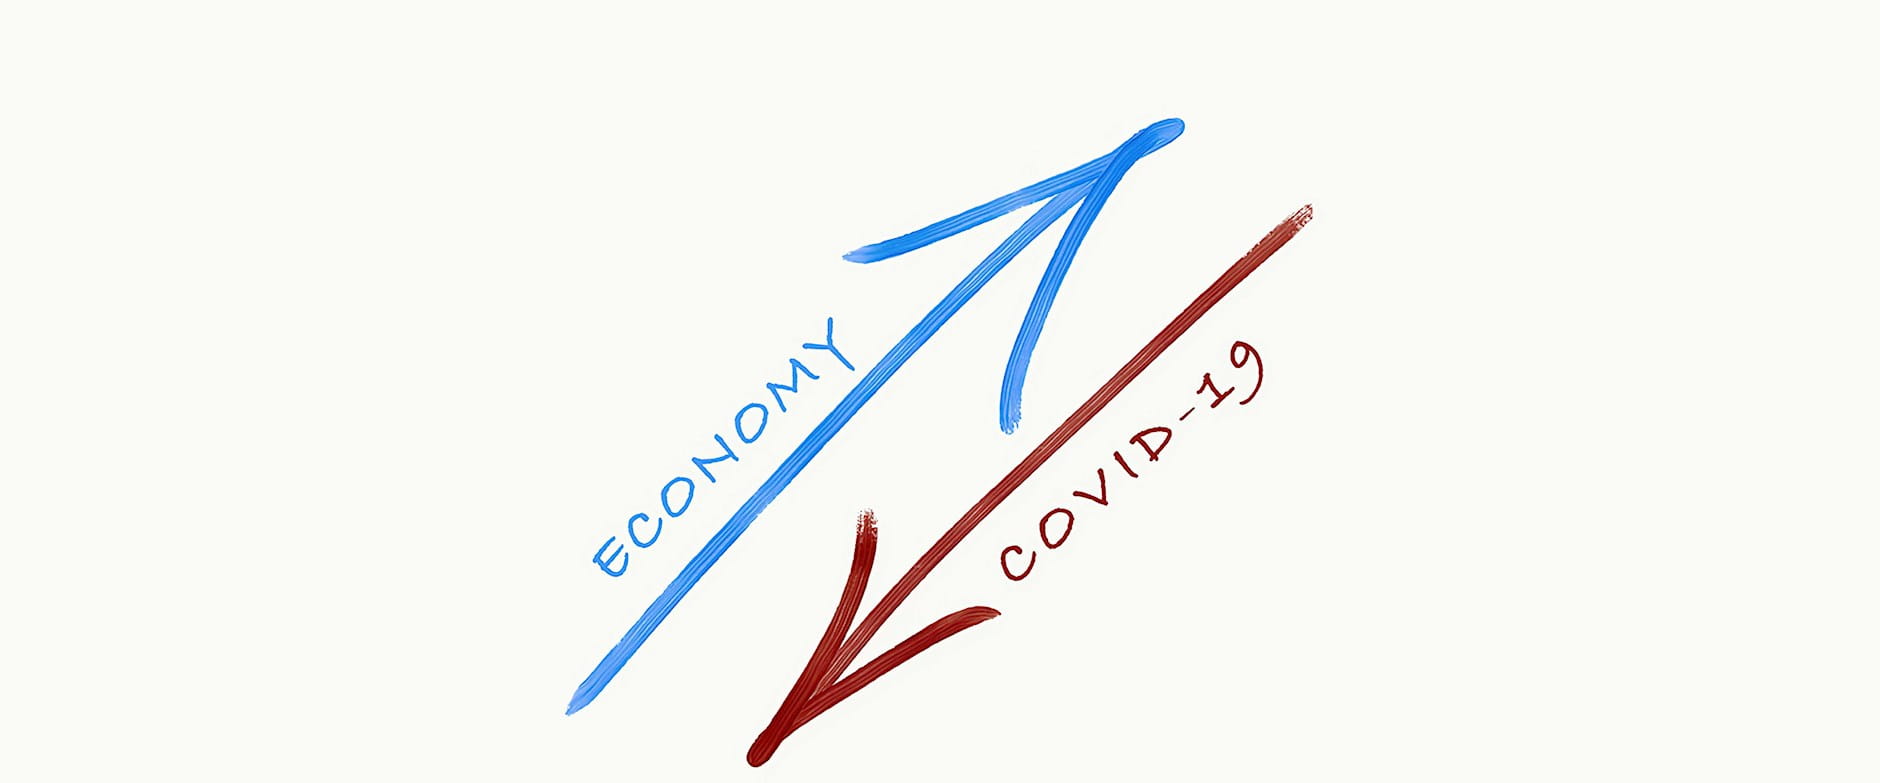 An up arrow with the word Economy and a down arrow with the word Covid-19